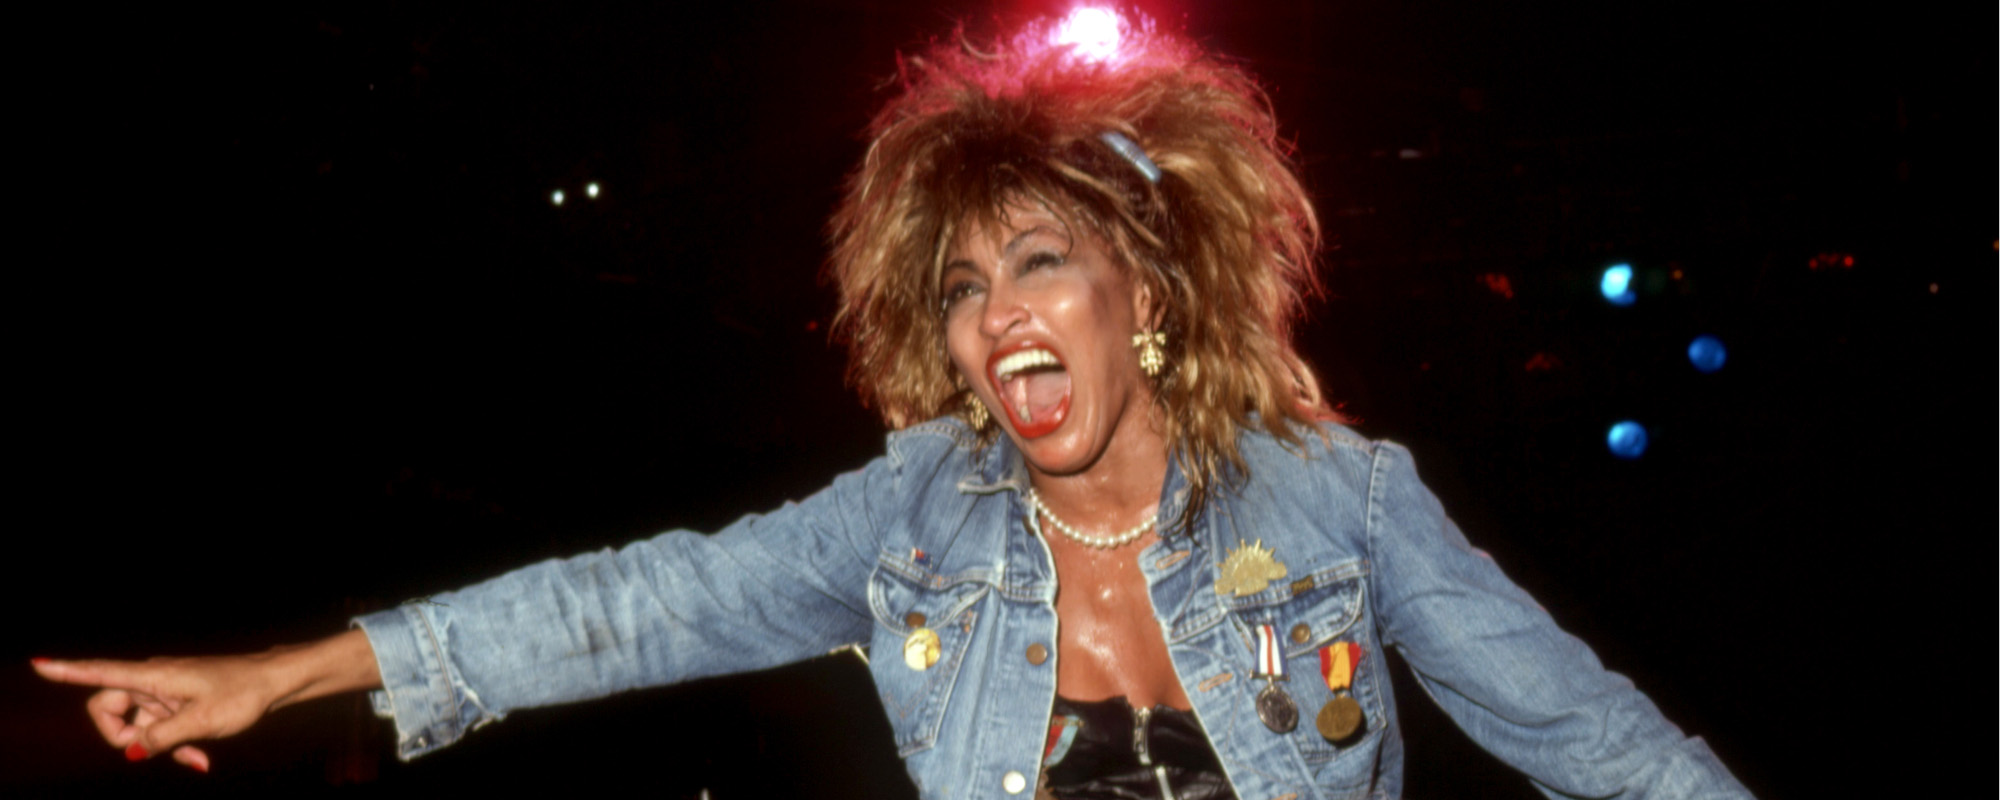 5 Songs You Didn’t Know Tina Turner Wrote